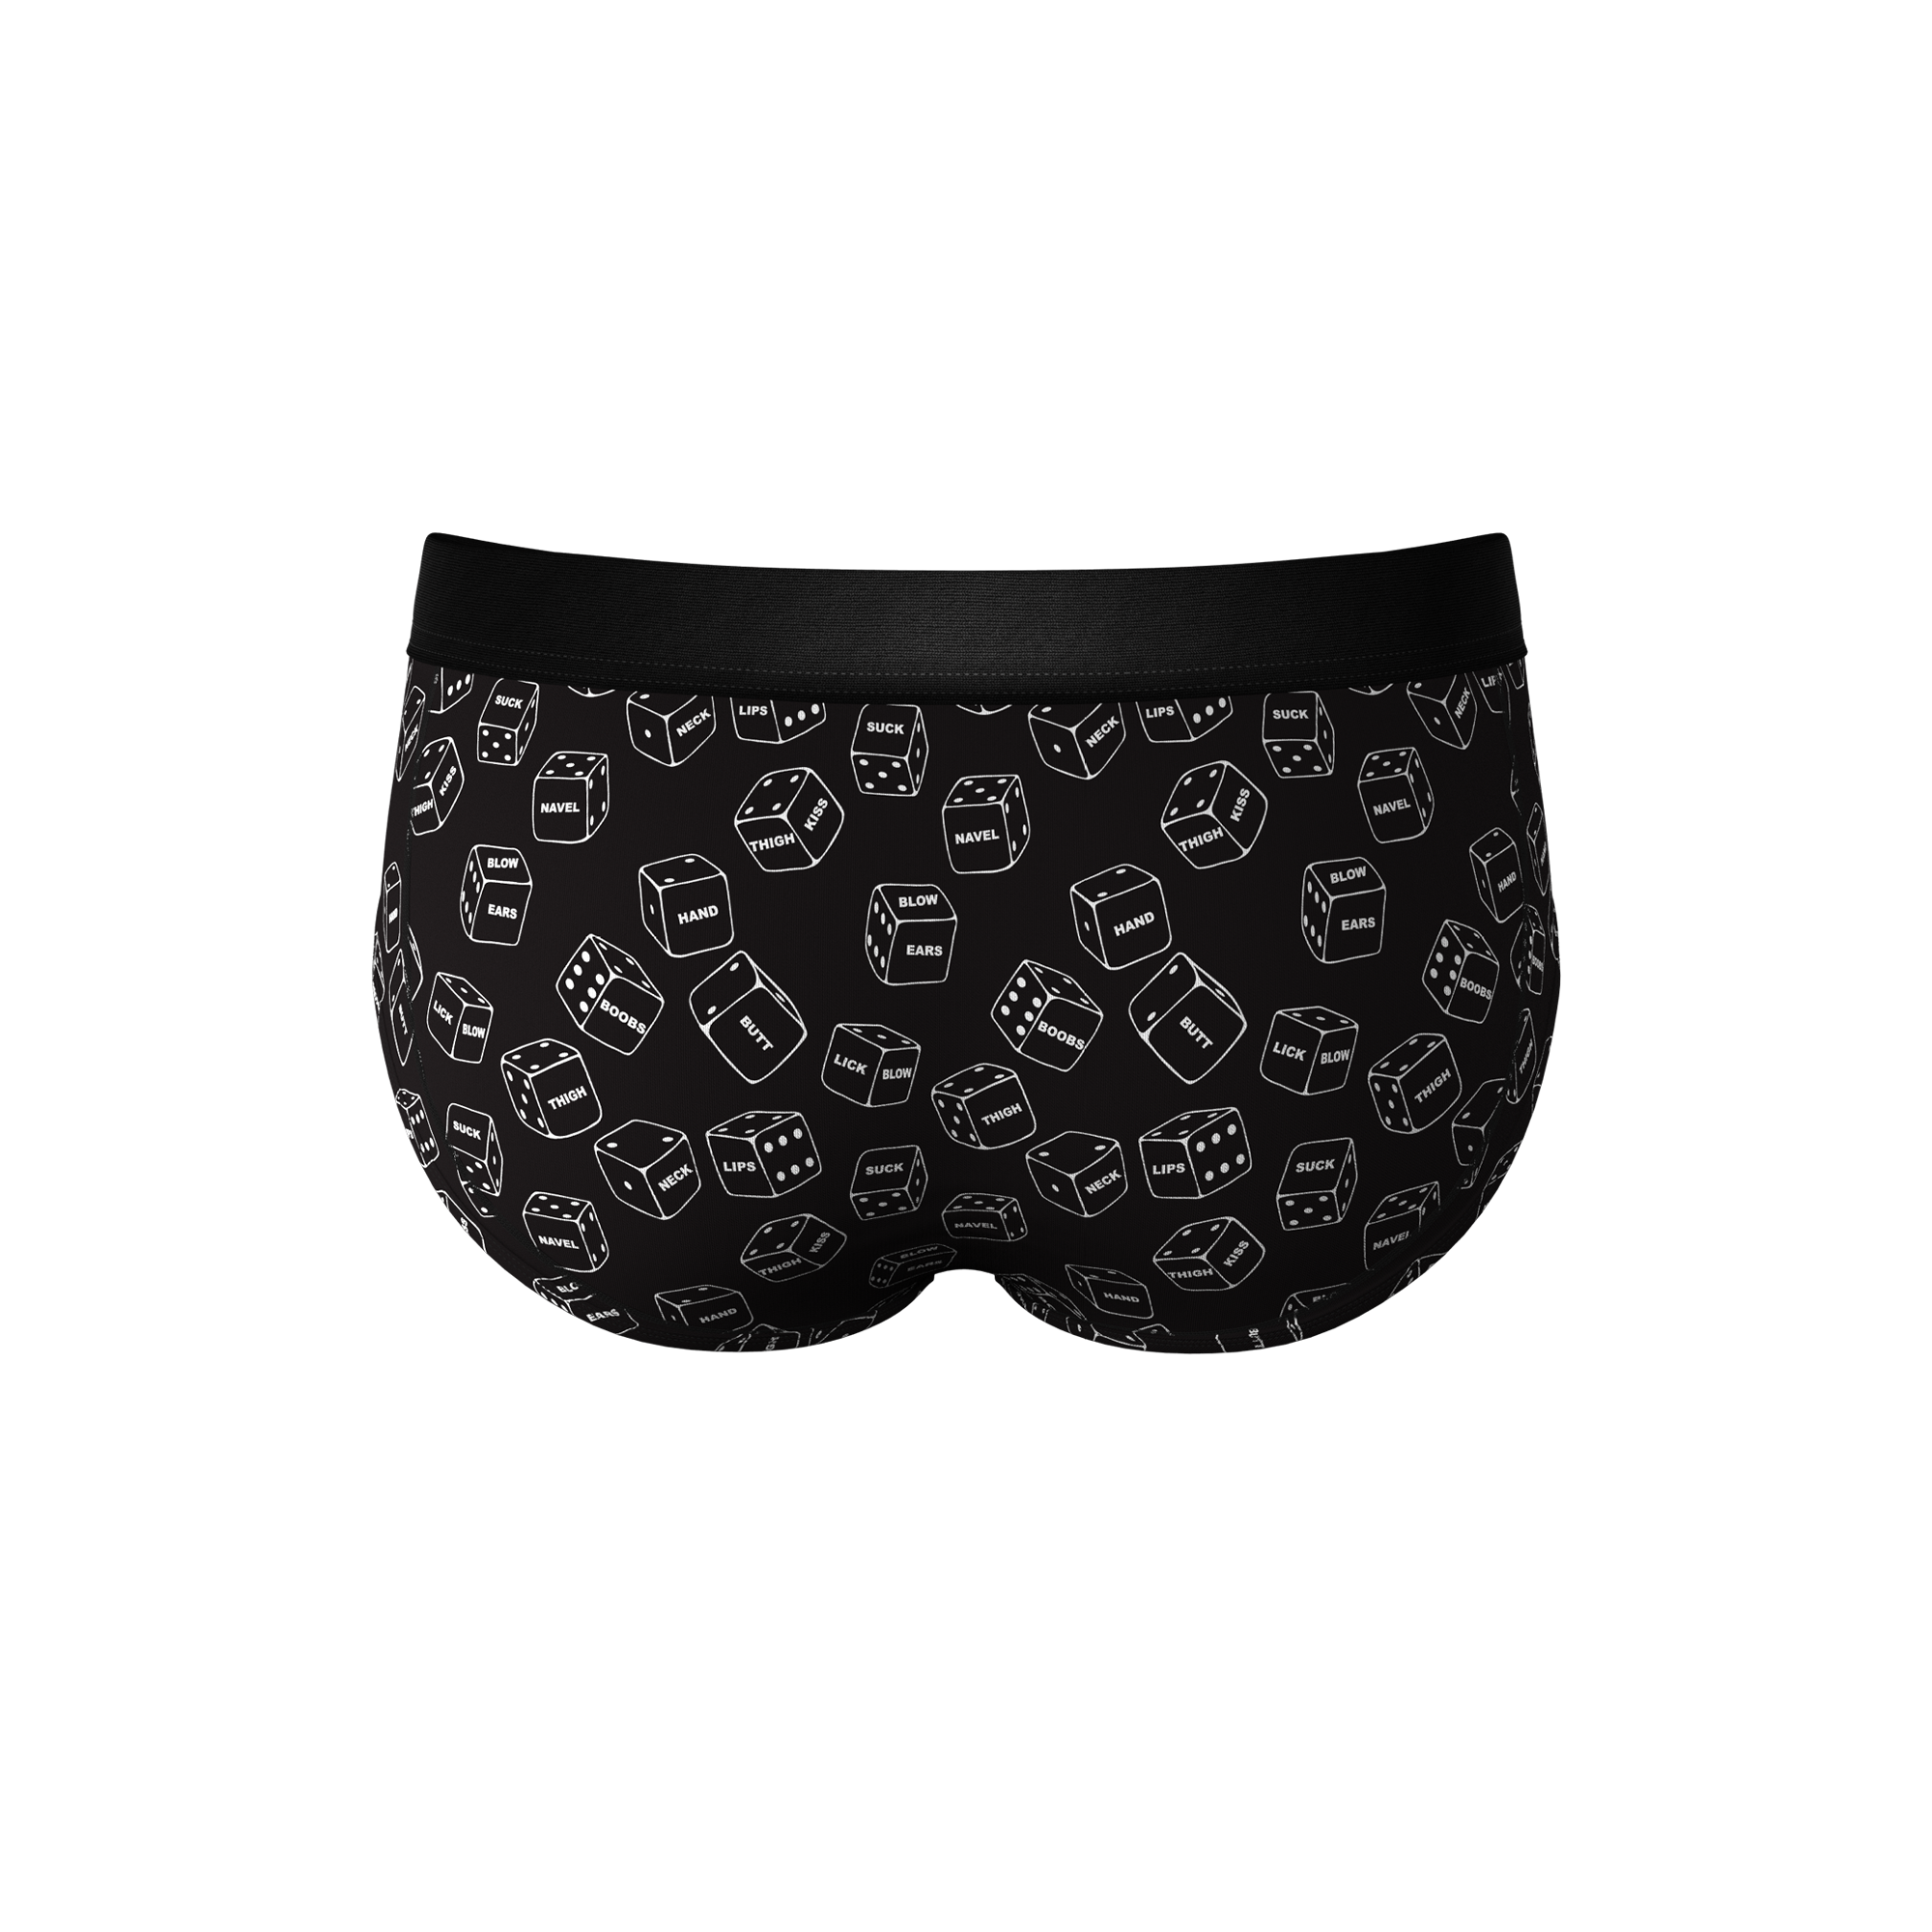 The Free For All - Shinesty Glow In The Dark Dice Cheeky Underwear XL 